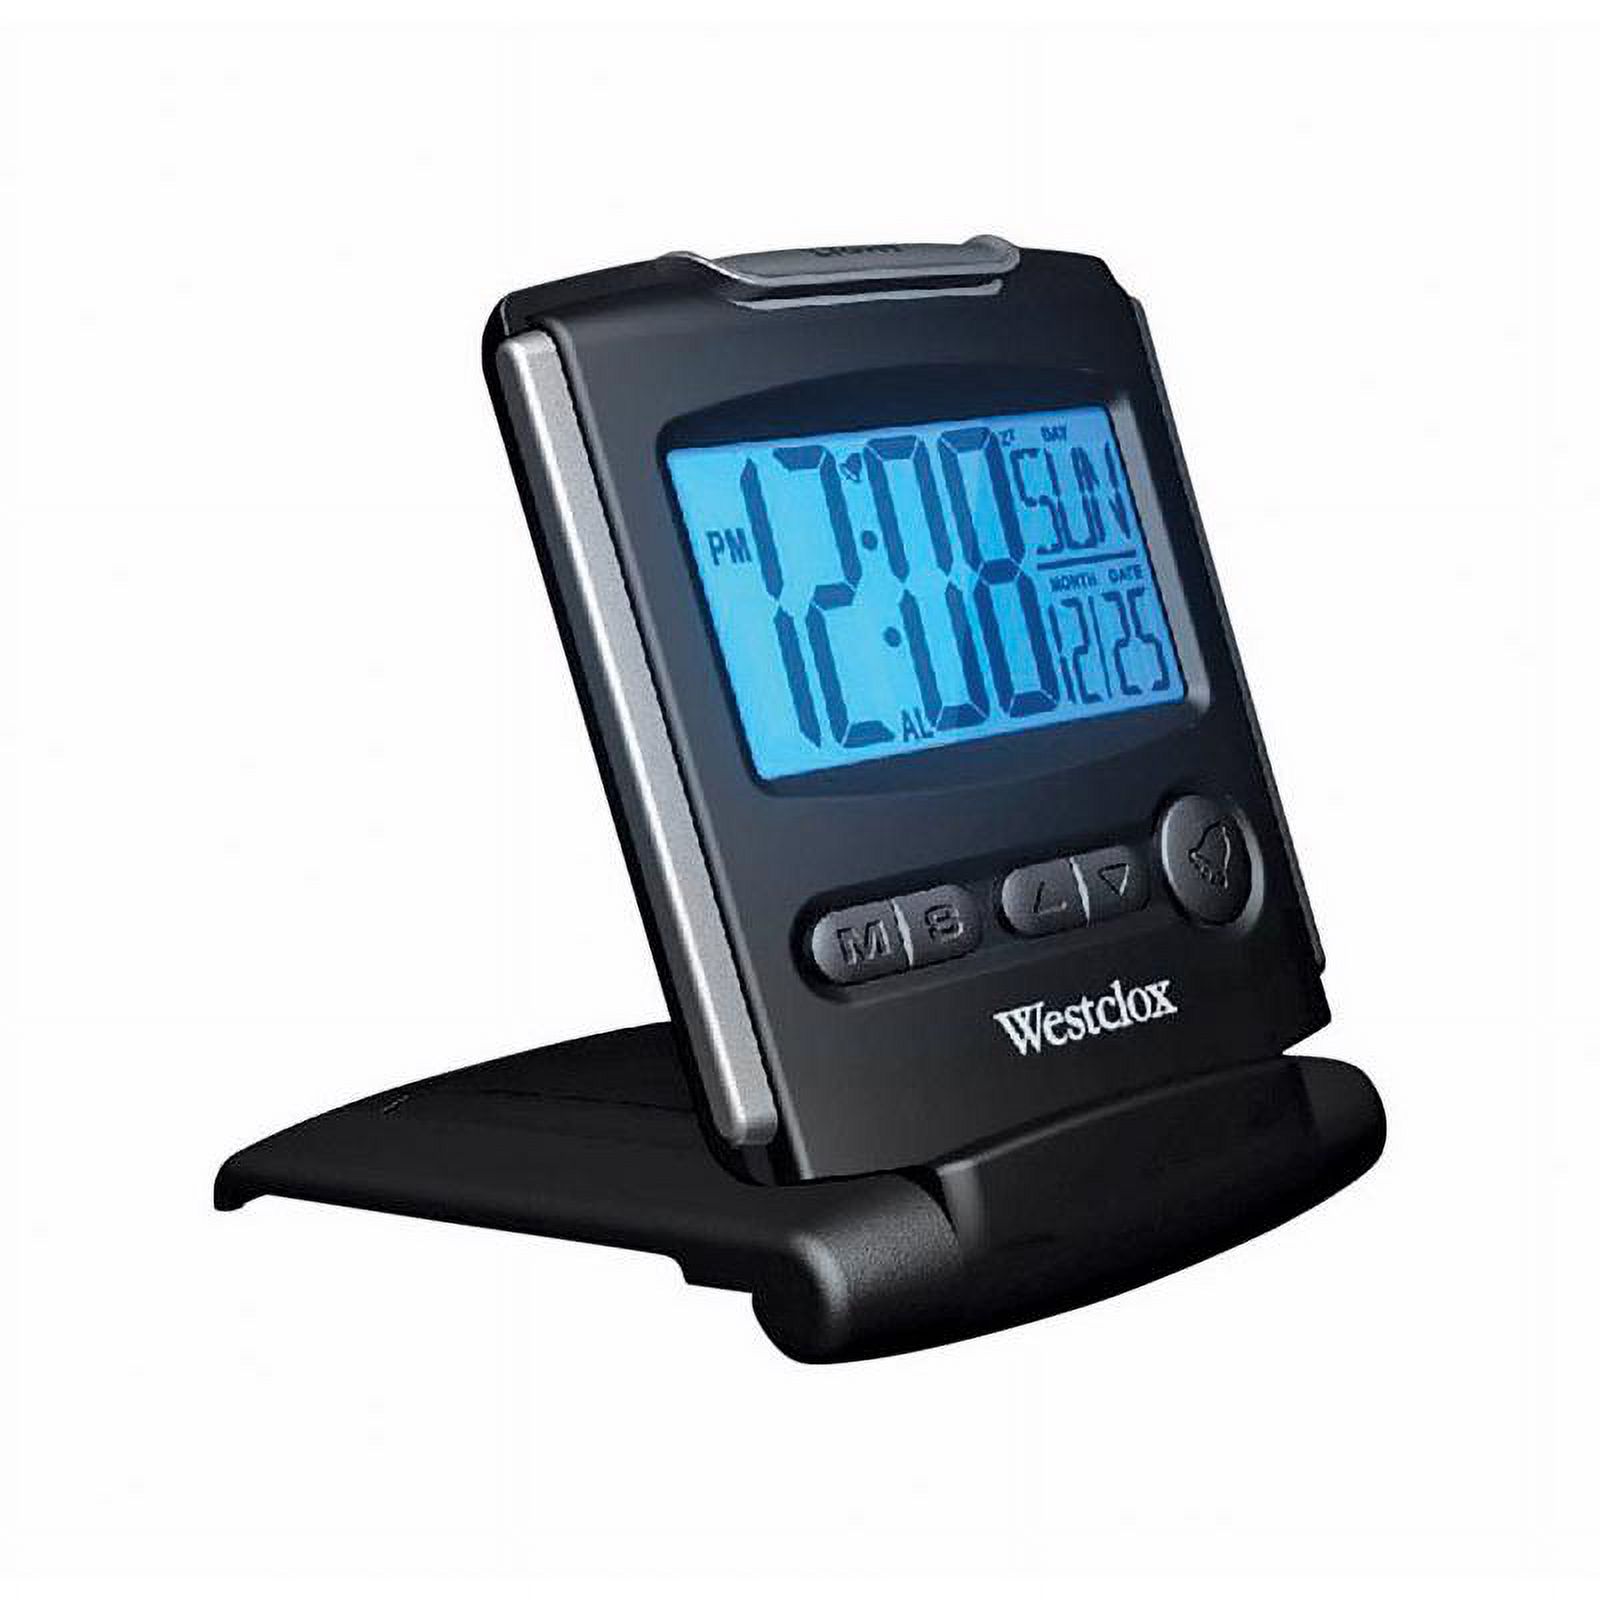 Westclox Black and Silver Fold able Digital Travel Alarm Clock with Large LCD Display - image 2 of 2